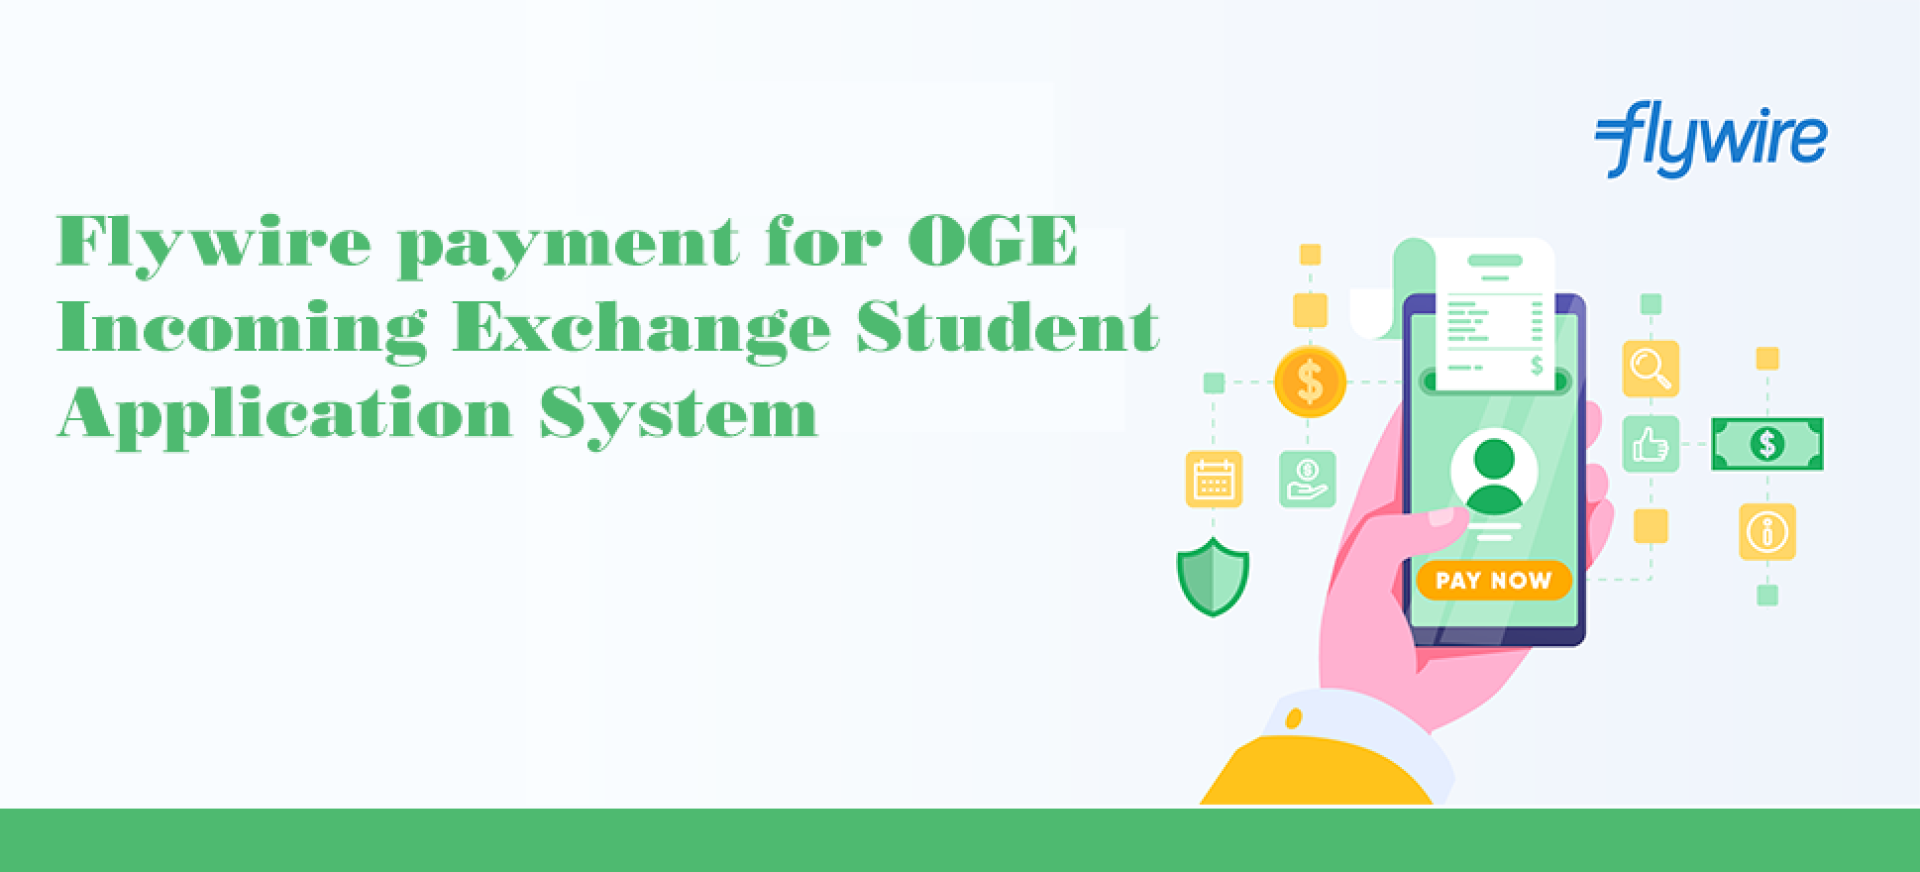 Issue 13 - Flywire payment for OGE Incoming Exchange Student Application System